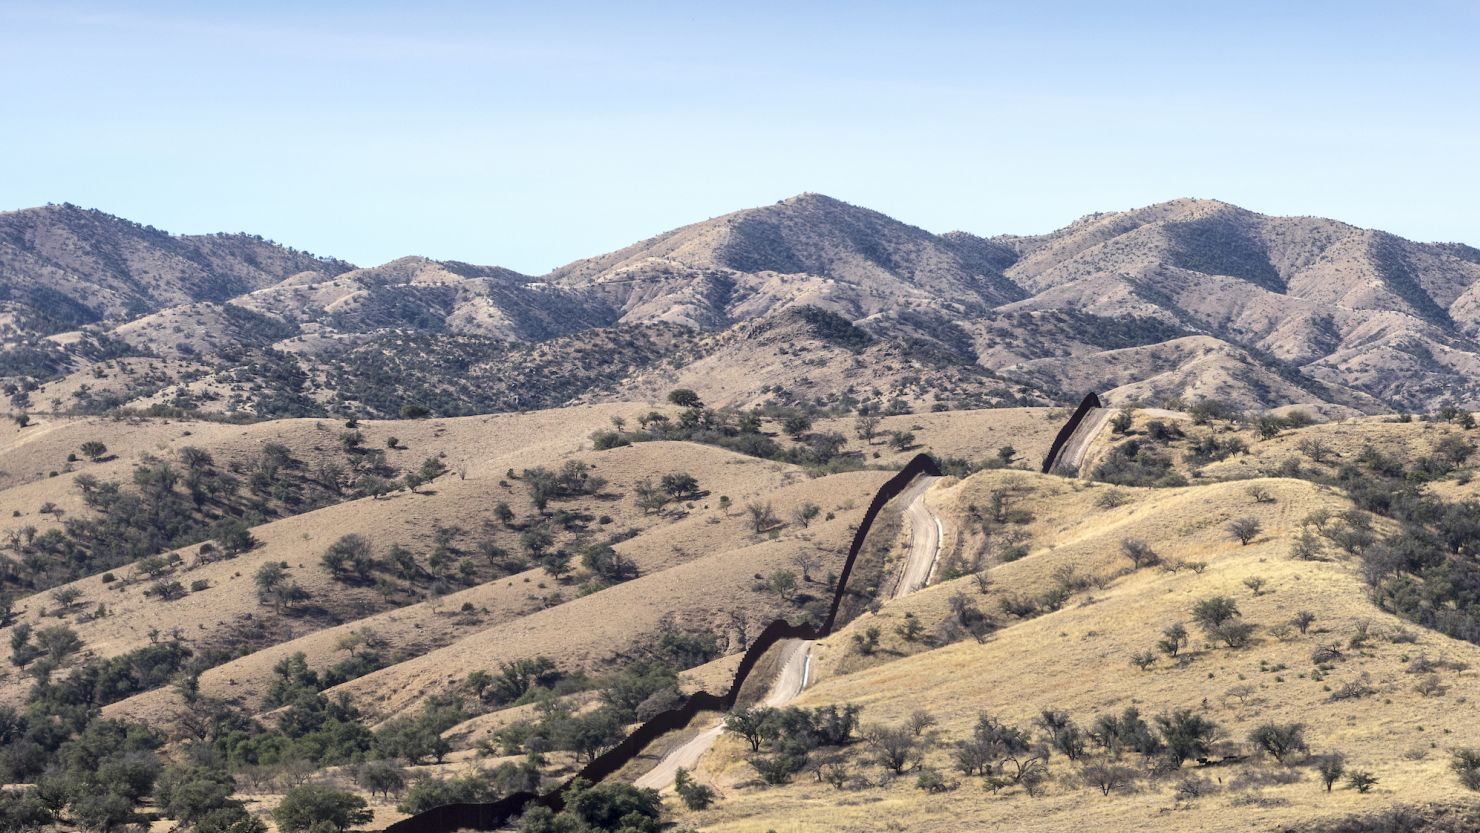 NOGALES, AZ - JANUARY 21:  The U.S.-Mexico border fence stretches into the countryside on January 21, 2014 near Nogales, Arizona.  (Photograph by Charles Ommanney/Reportage by Getty Images)